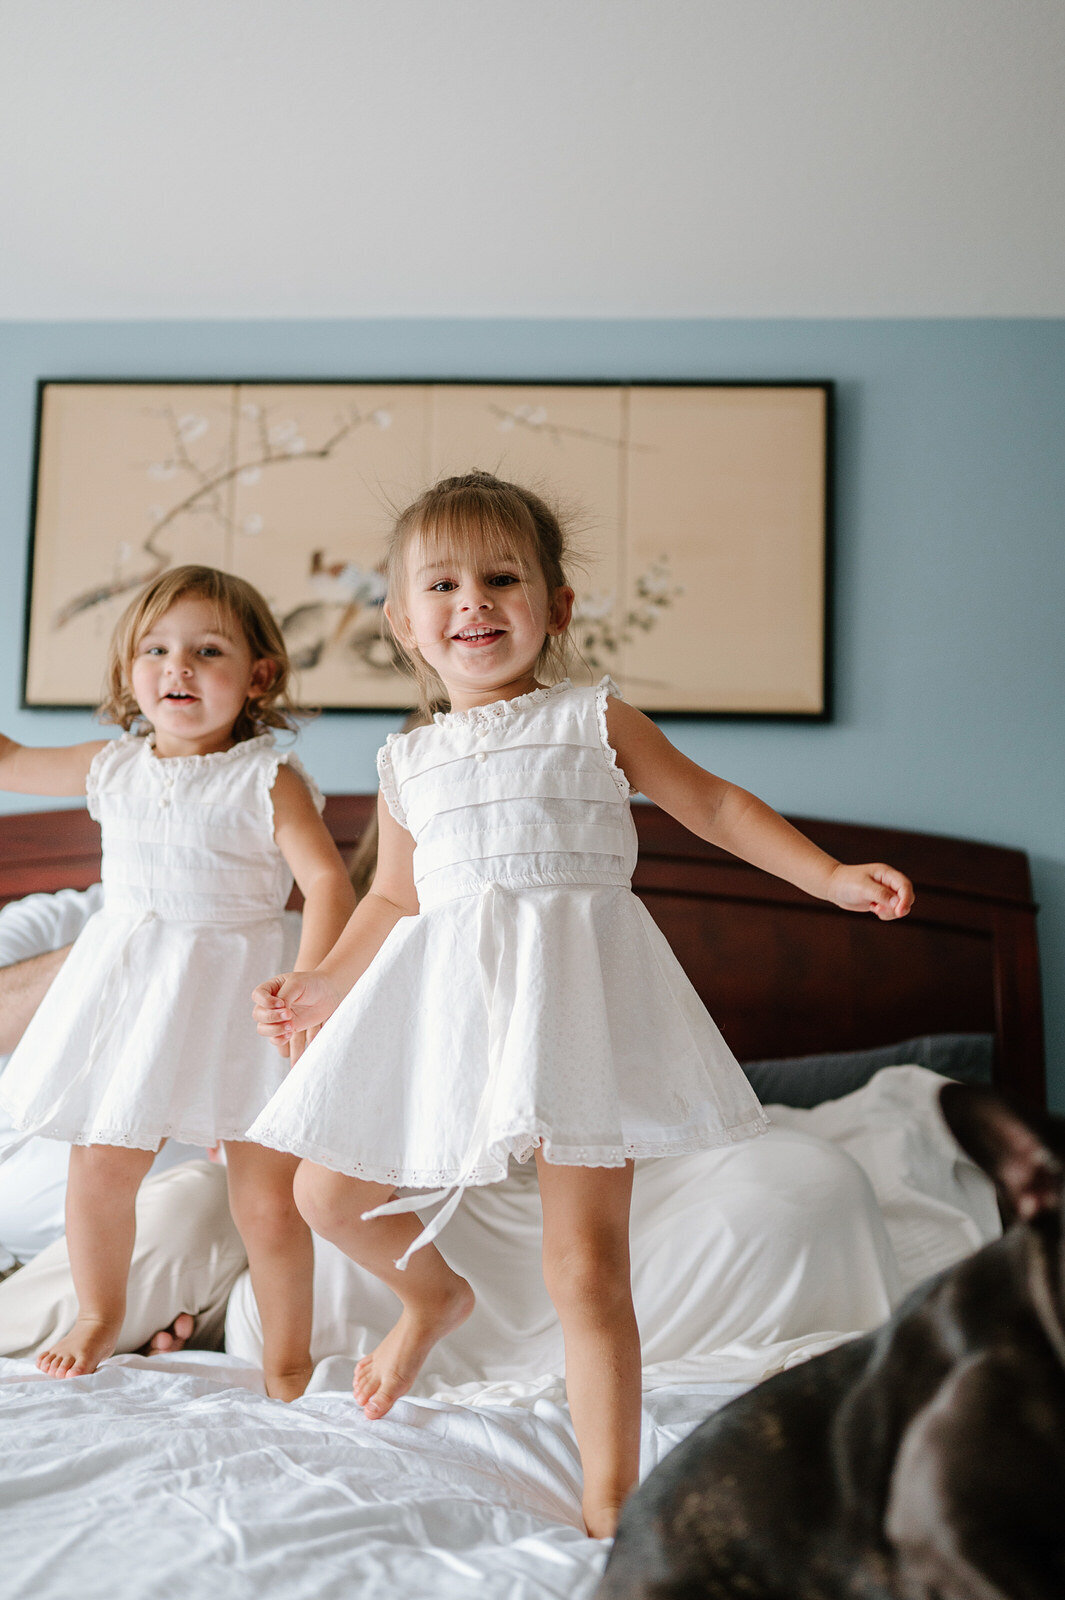 Twins jumping on bed in joy